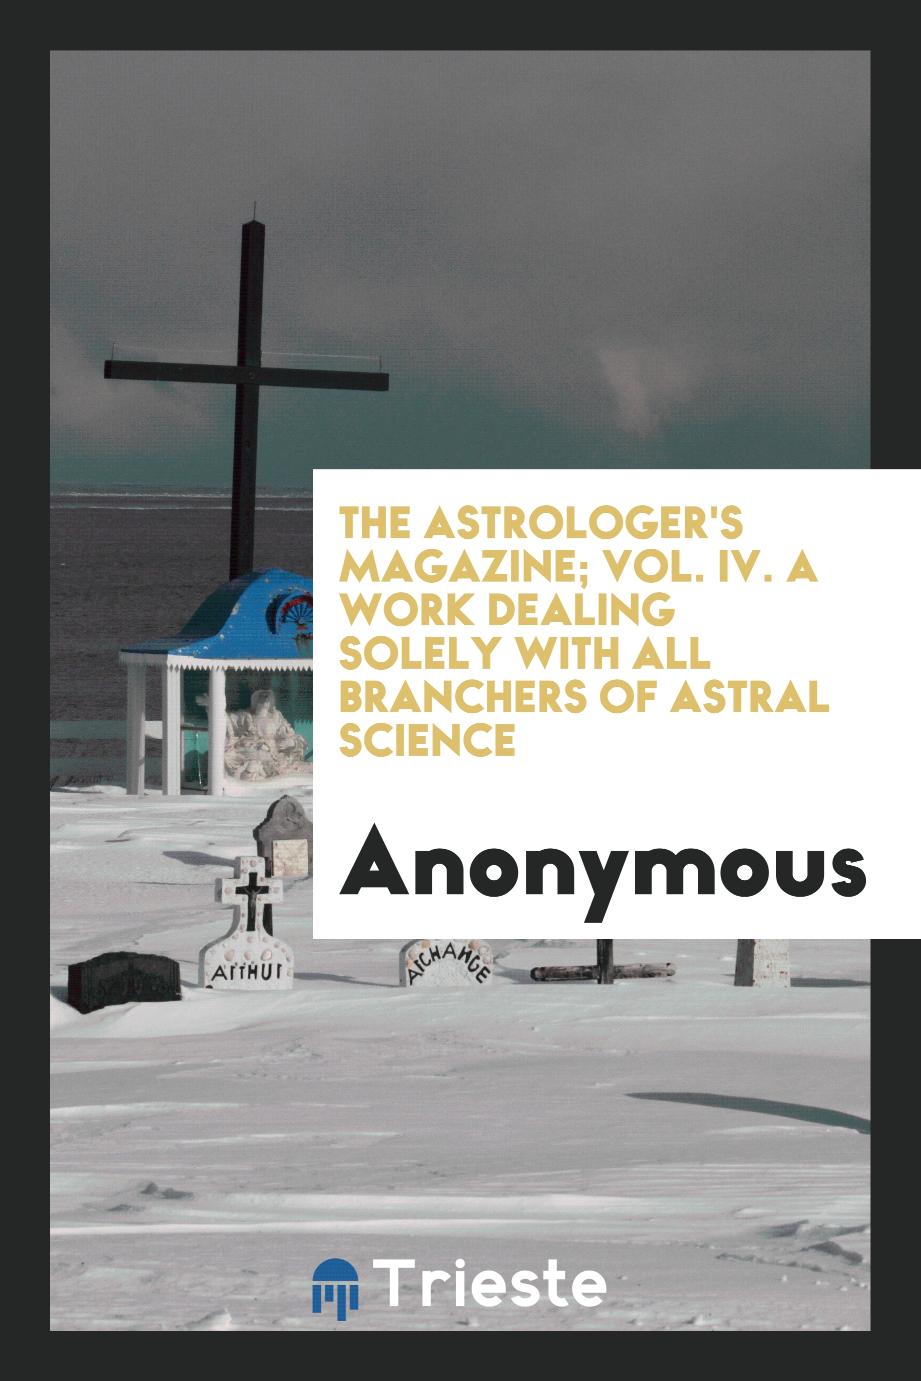 The Astrologer's Magazine; Vol. IV. A Work Dealing Solely with All Branchers of Astral Science